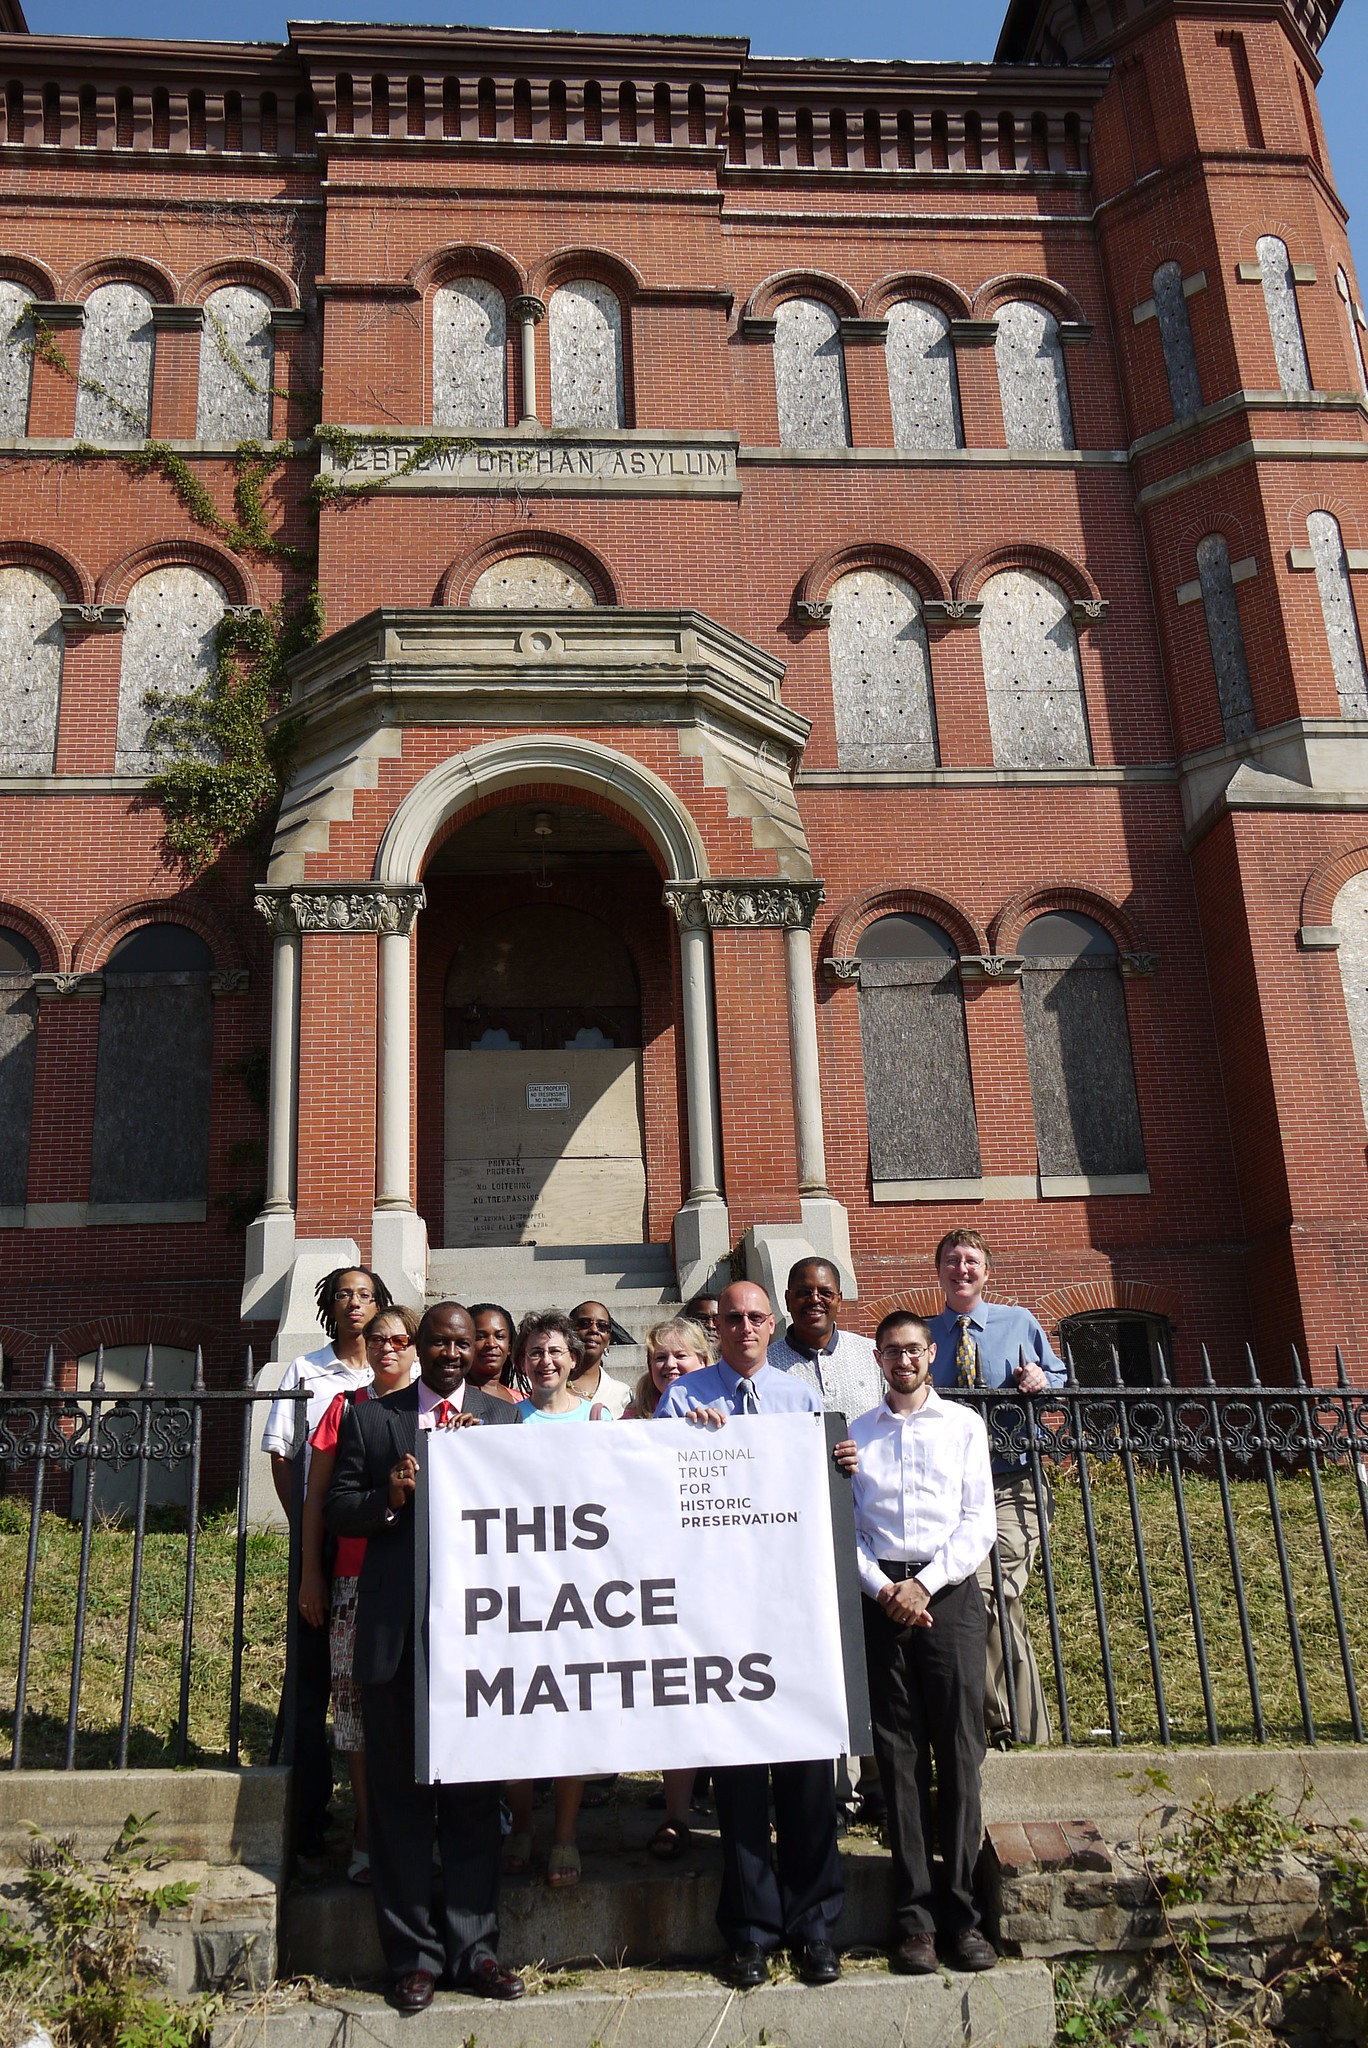 Coppin Heights Community Development Corporation and Baltimore Heritage at the Hebrew Orphan Asylum, 2009.